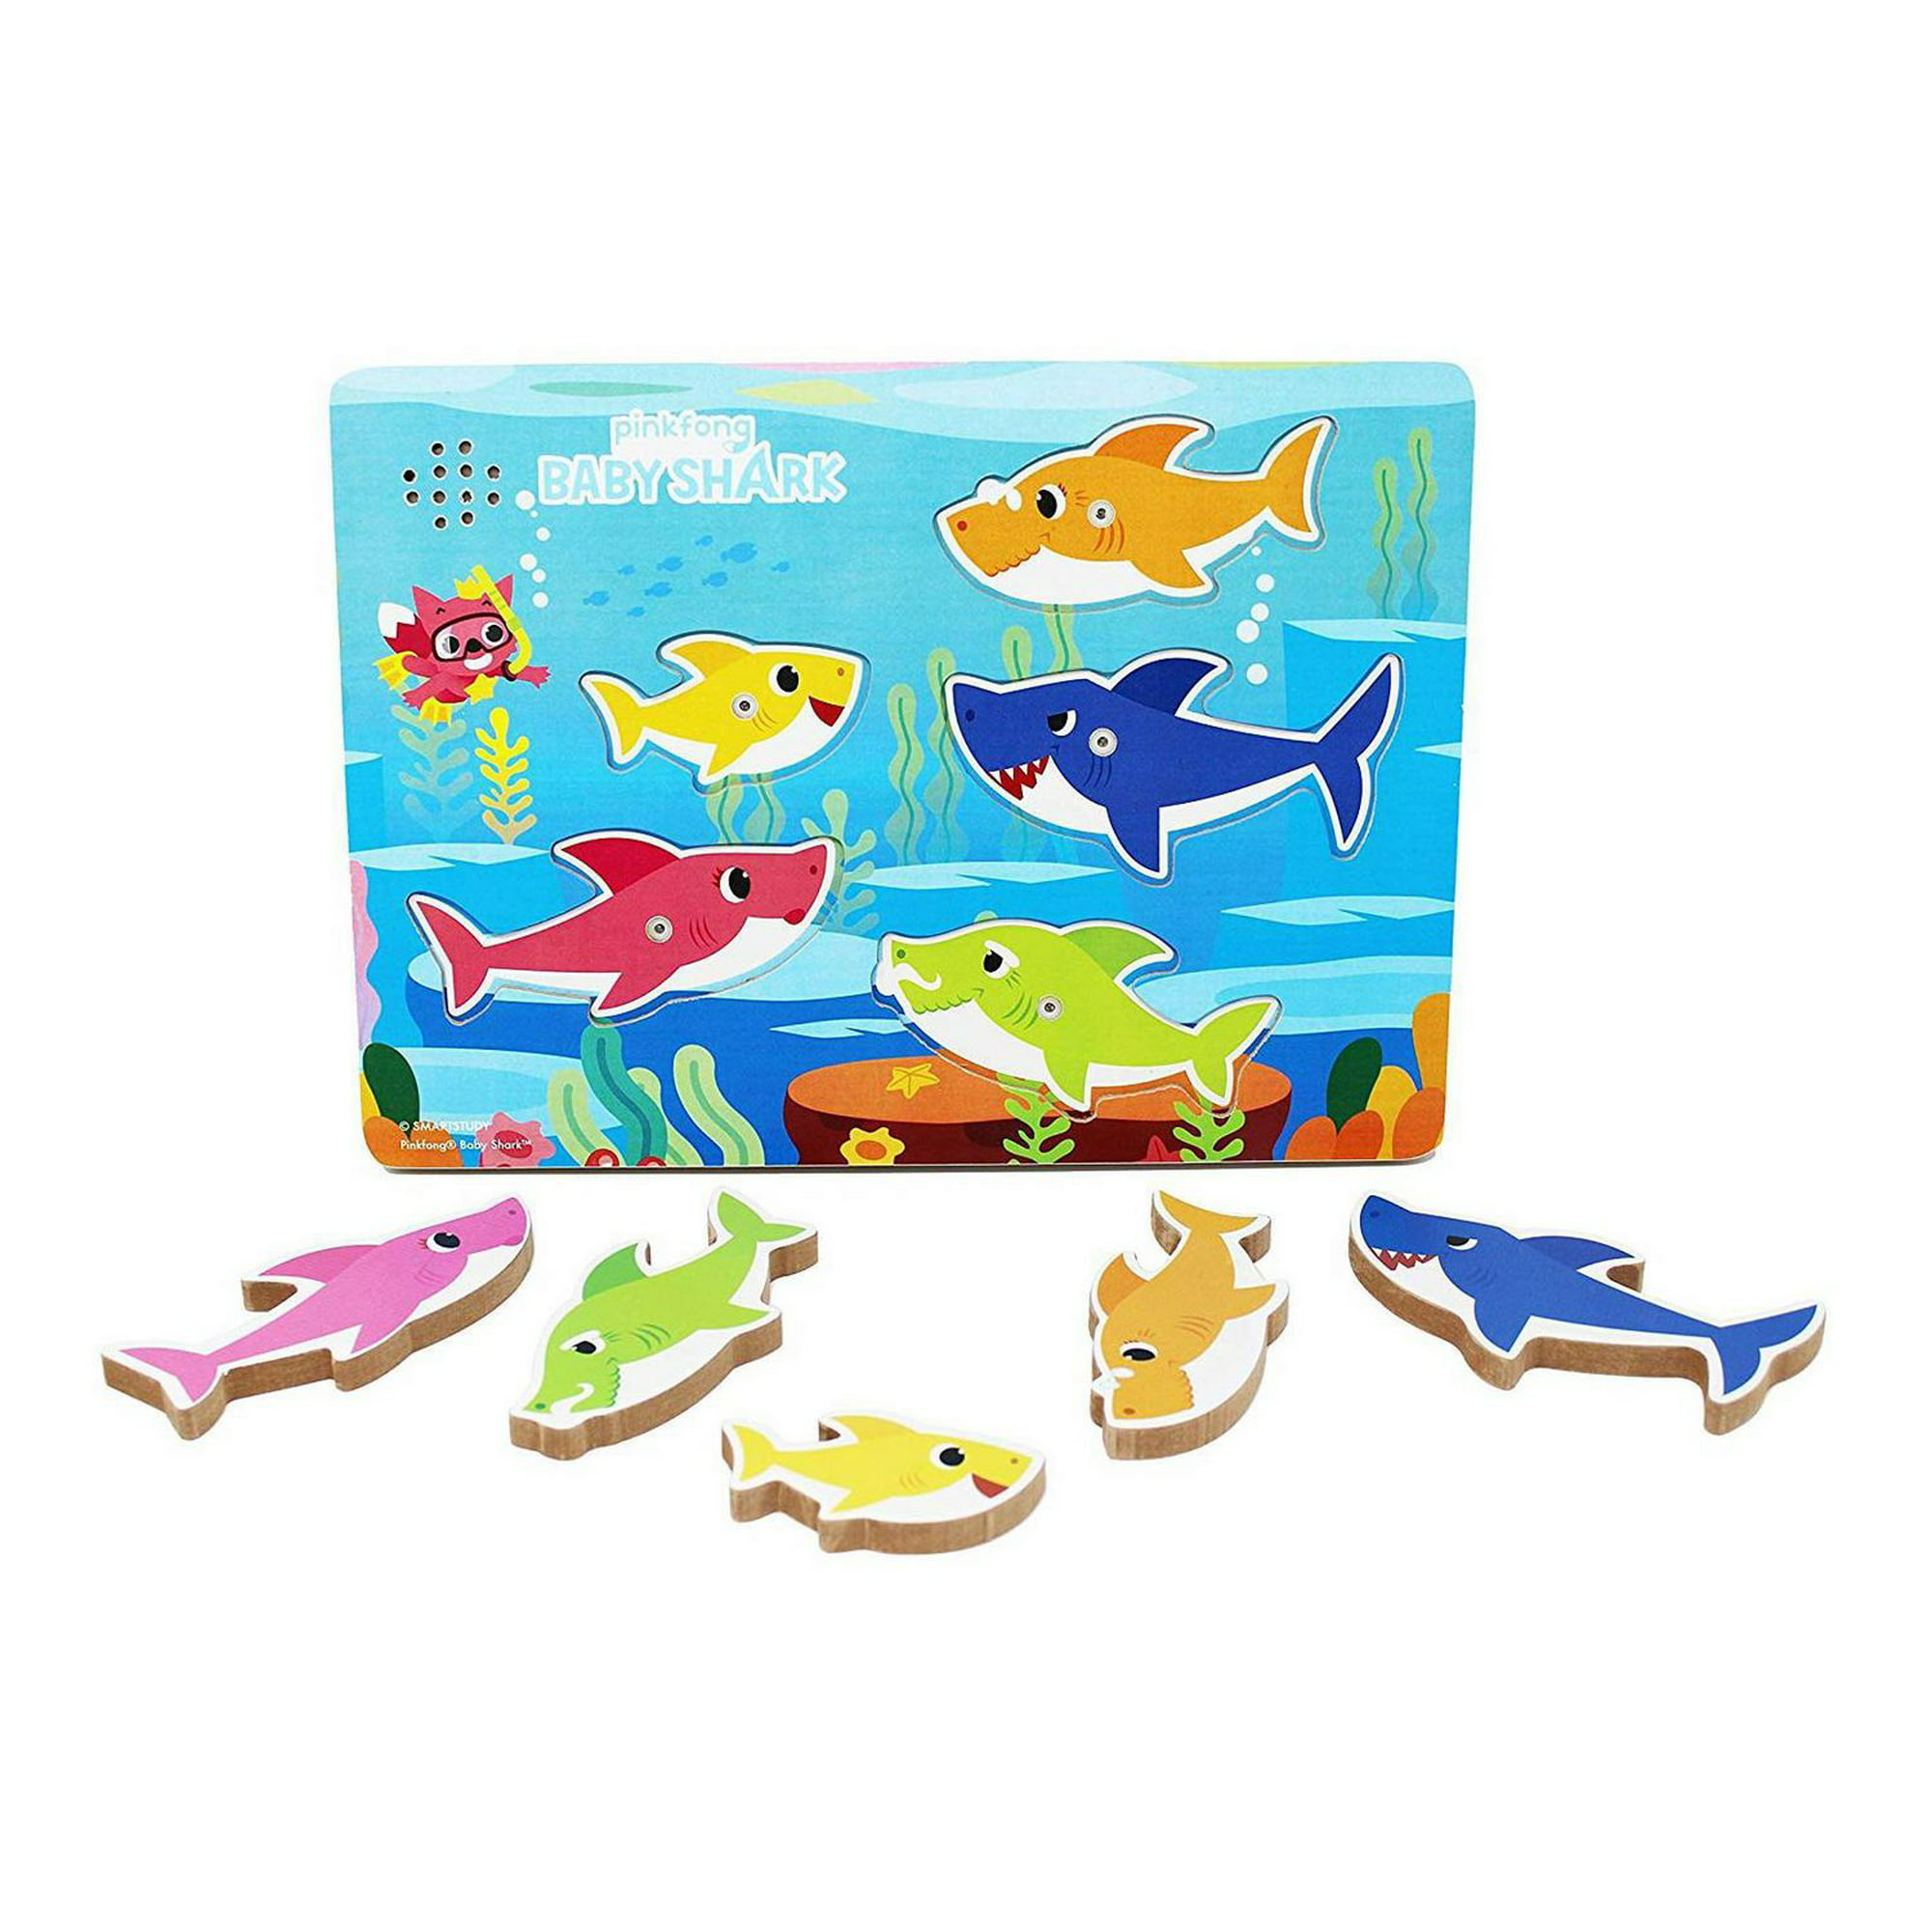 Cardinal Games Pinkfong Baby Shark Wooden Puzzle 5 Pieces with